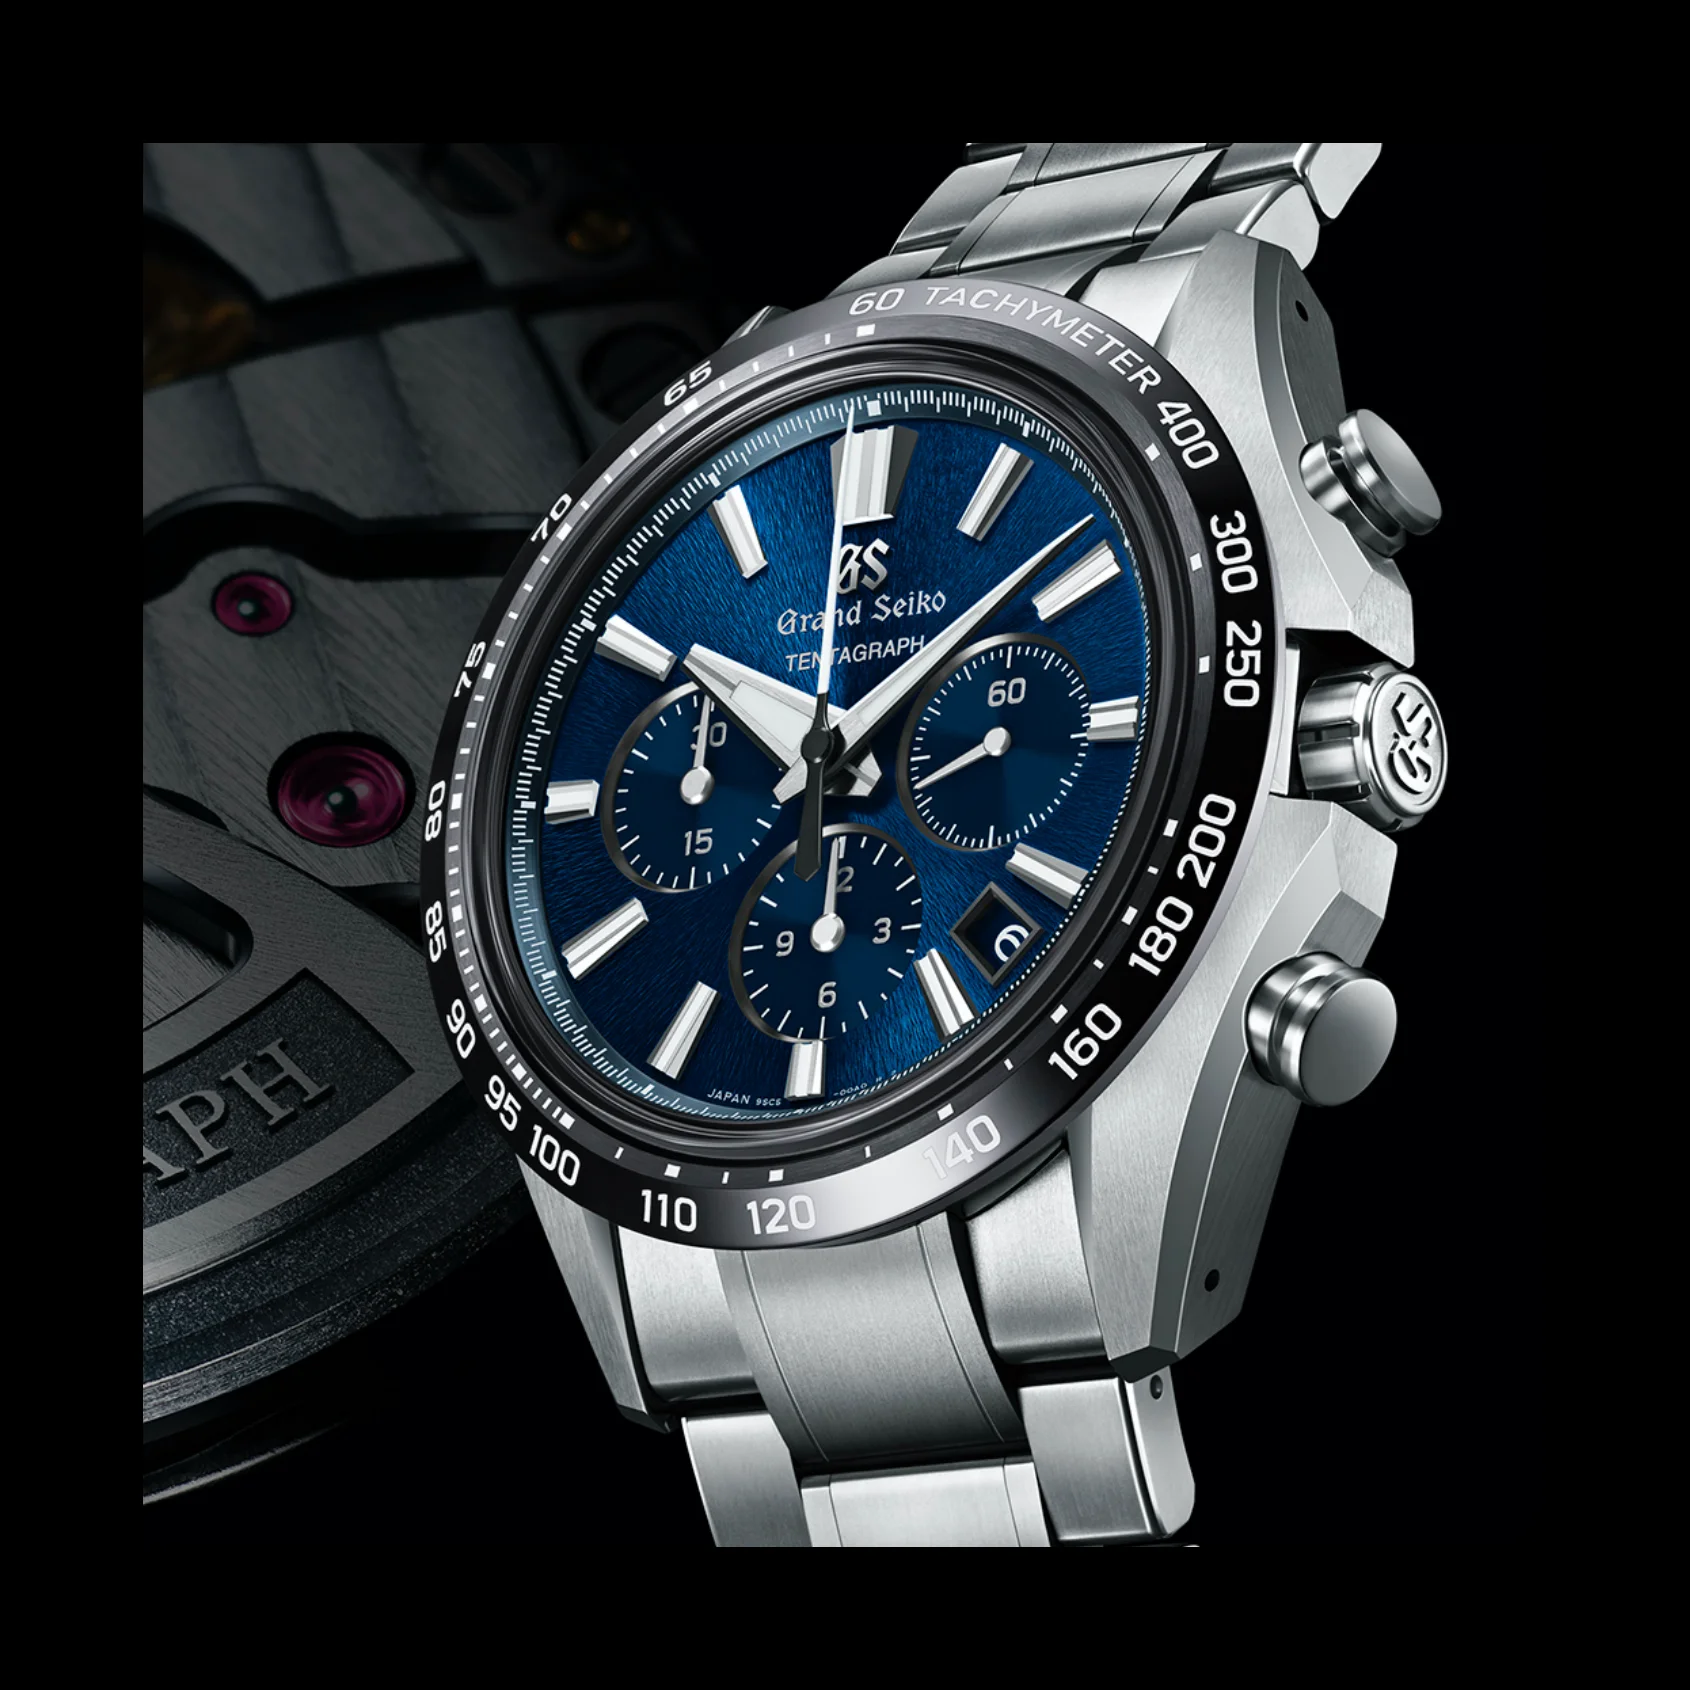 Five wildly desirable alternatives to the blue dial Rolex Oyster Perpetual 41